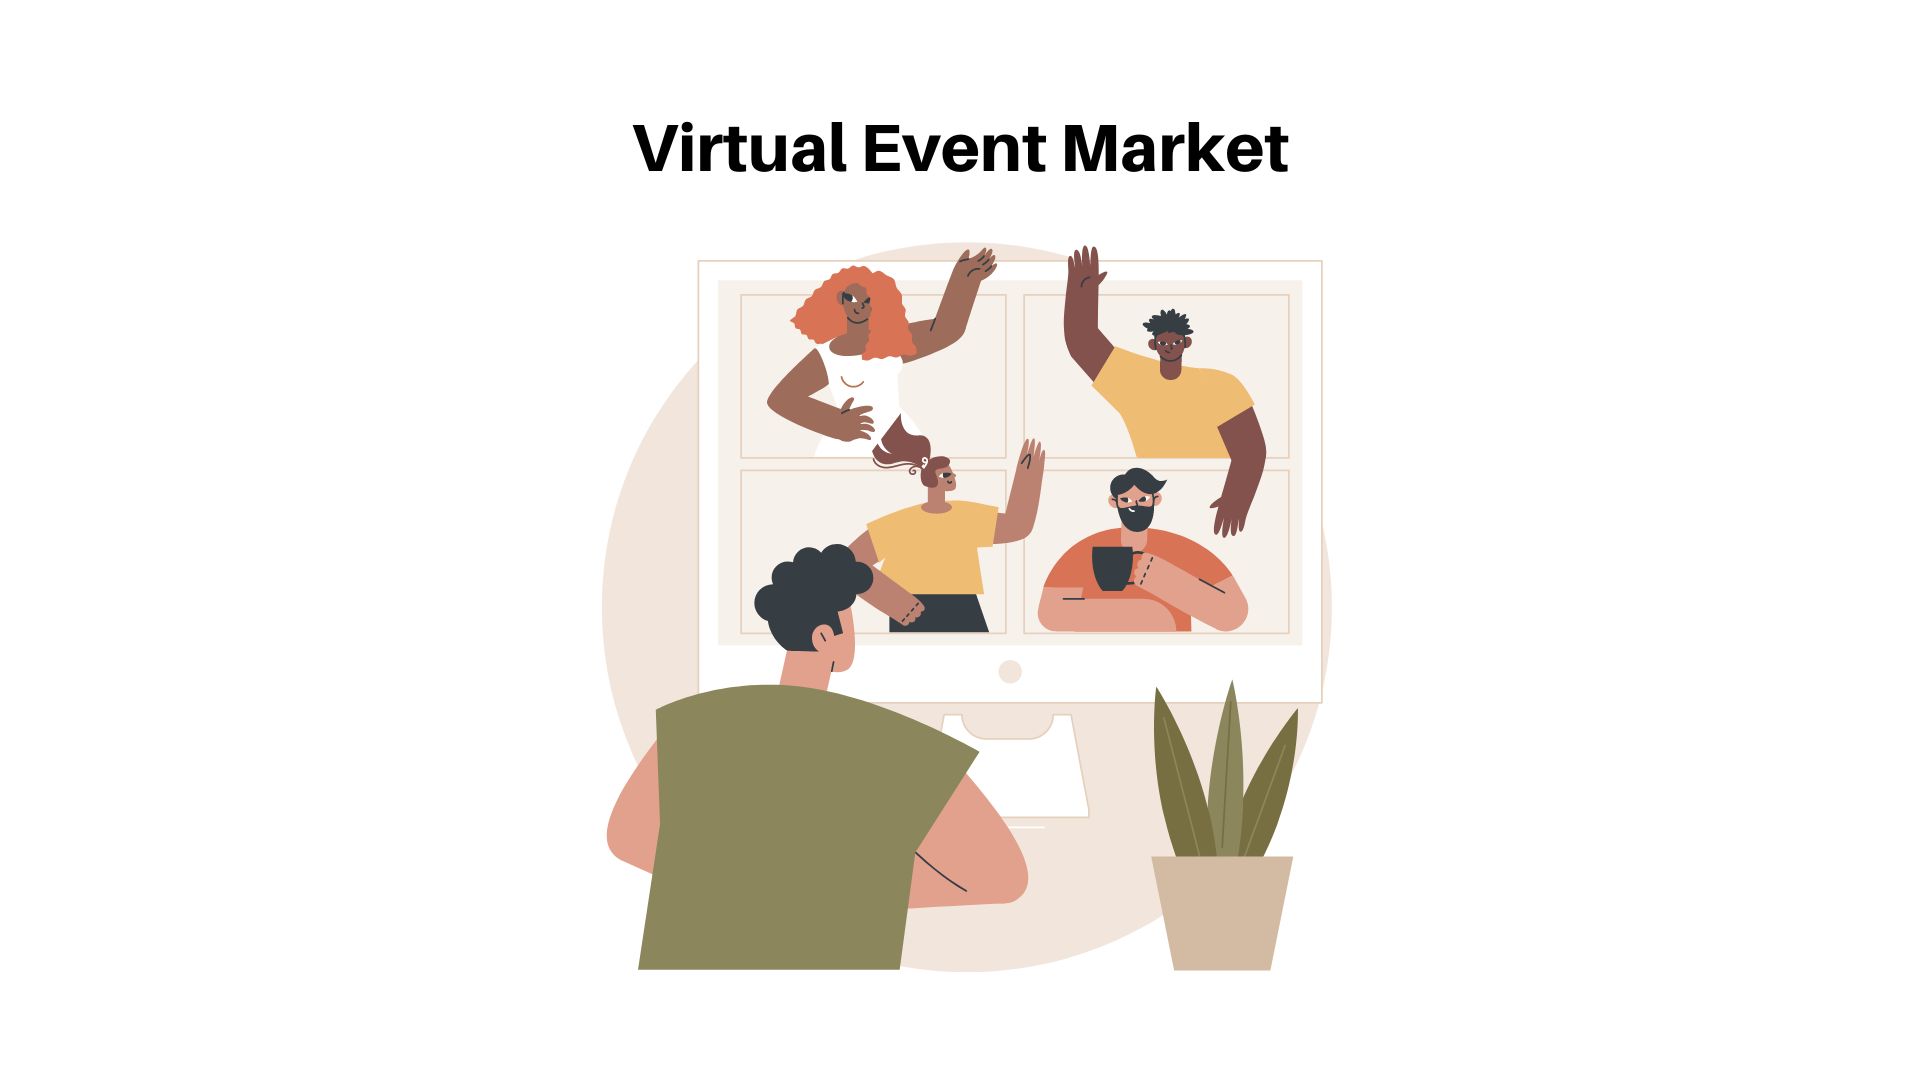 Virtual Event Market Growth (USD 1,066 Bn by 2032 at 18.8% CAGR) Global Analysis by Market.us